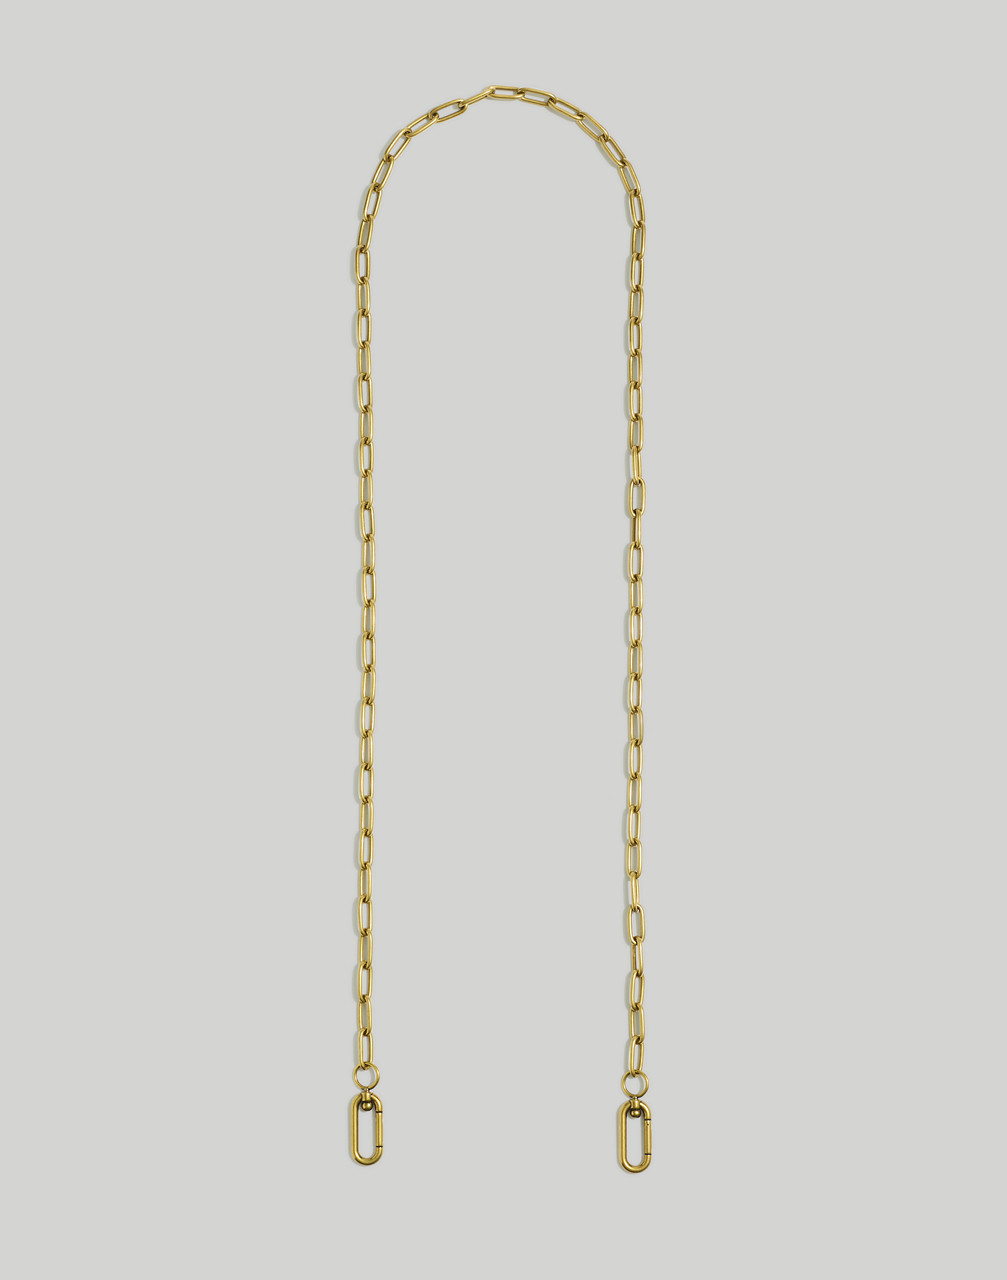 Mw The Crossbody Bag Strap: Chain Edition In Gold